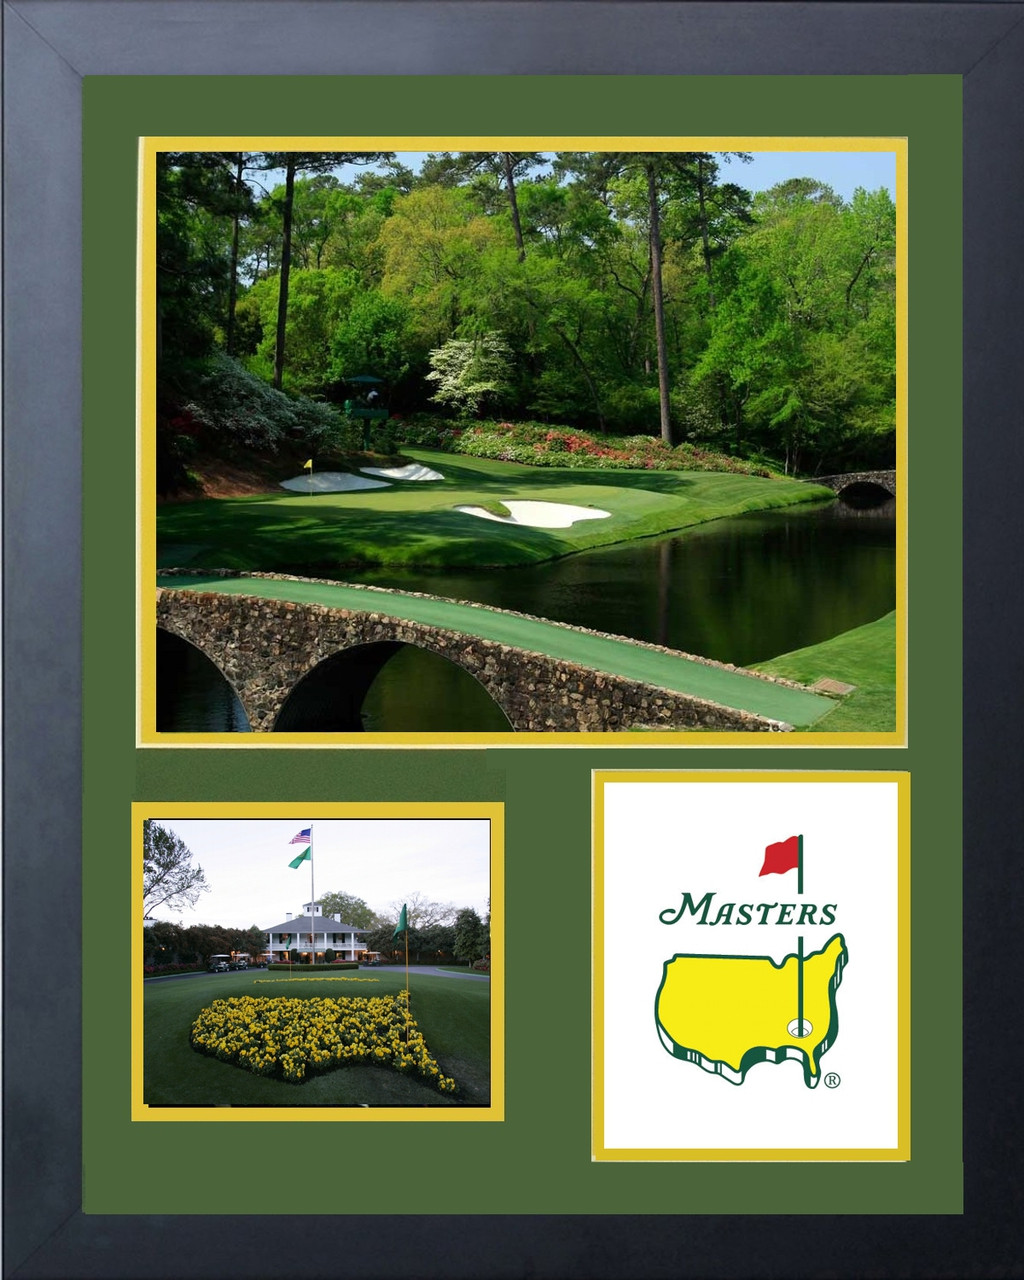 Masters 12th Hole Framed Print